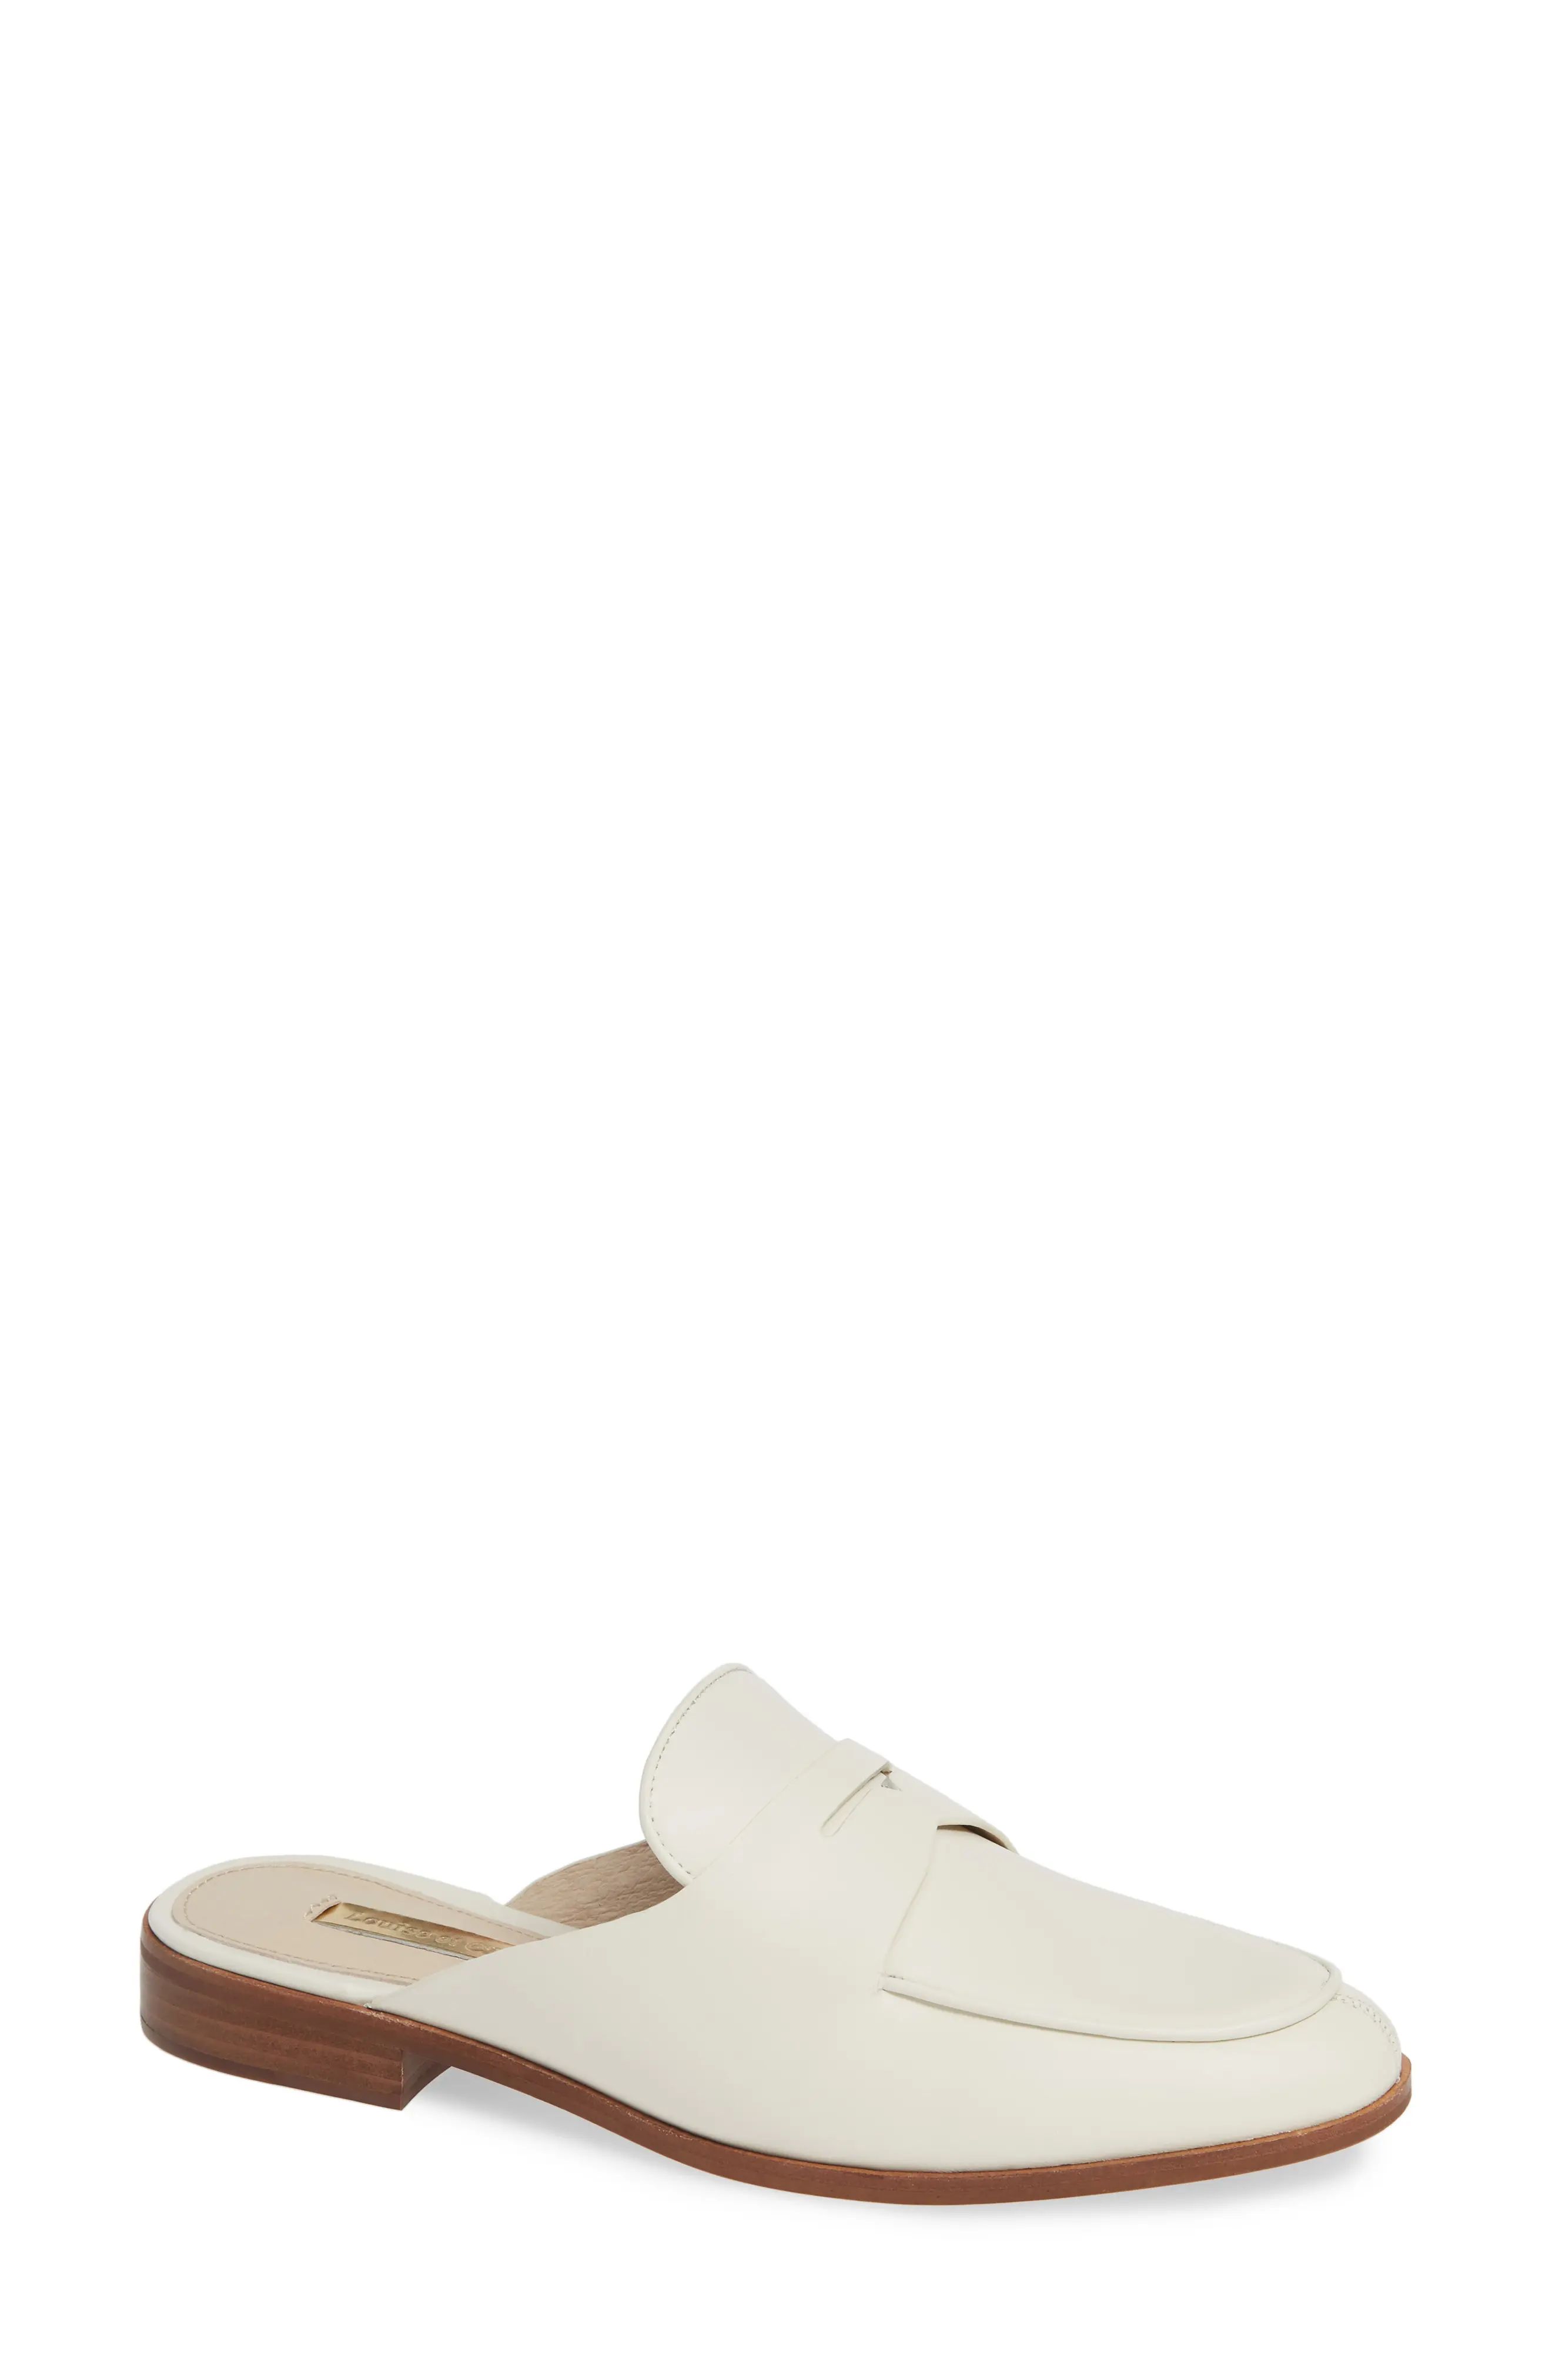 Women's Louise Et Cie Dugan Flat Loafer Mule, Size 5 M - White | Nordstrom